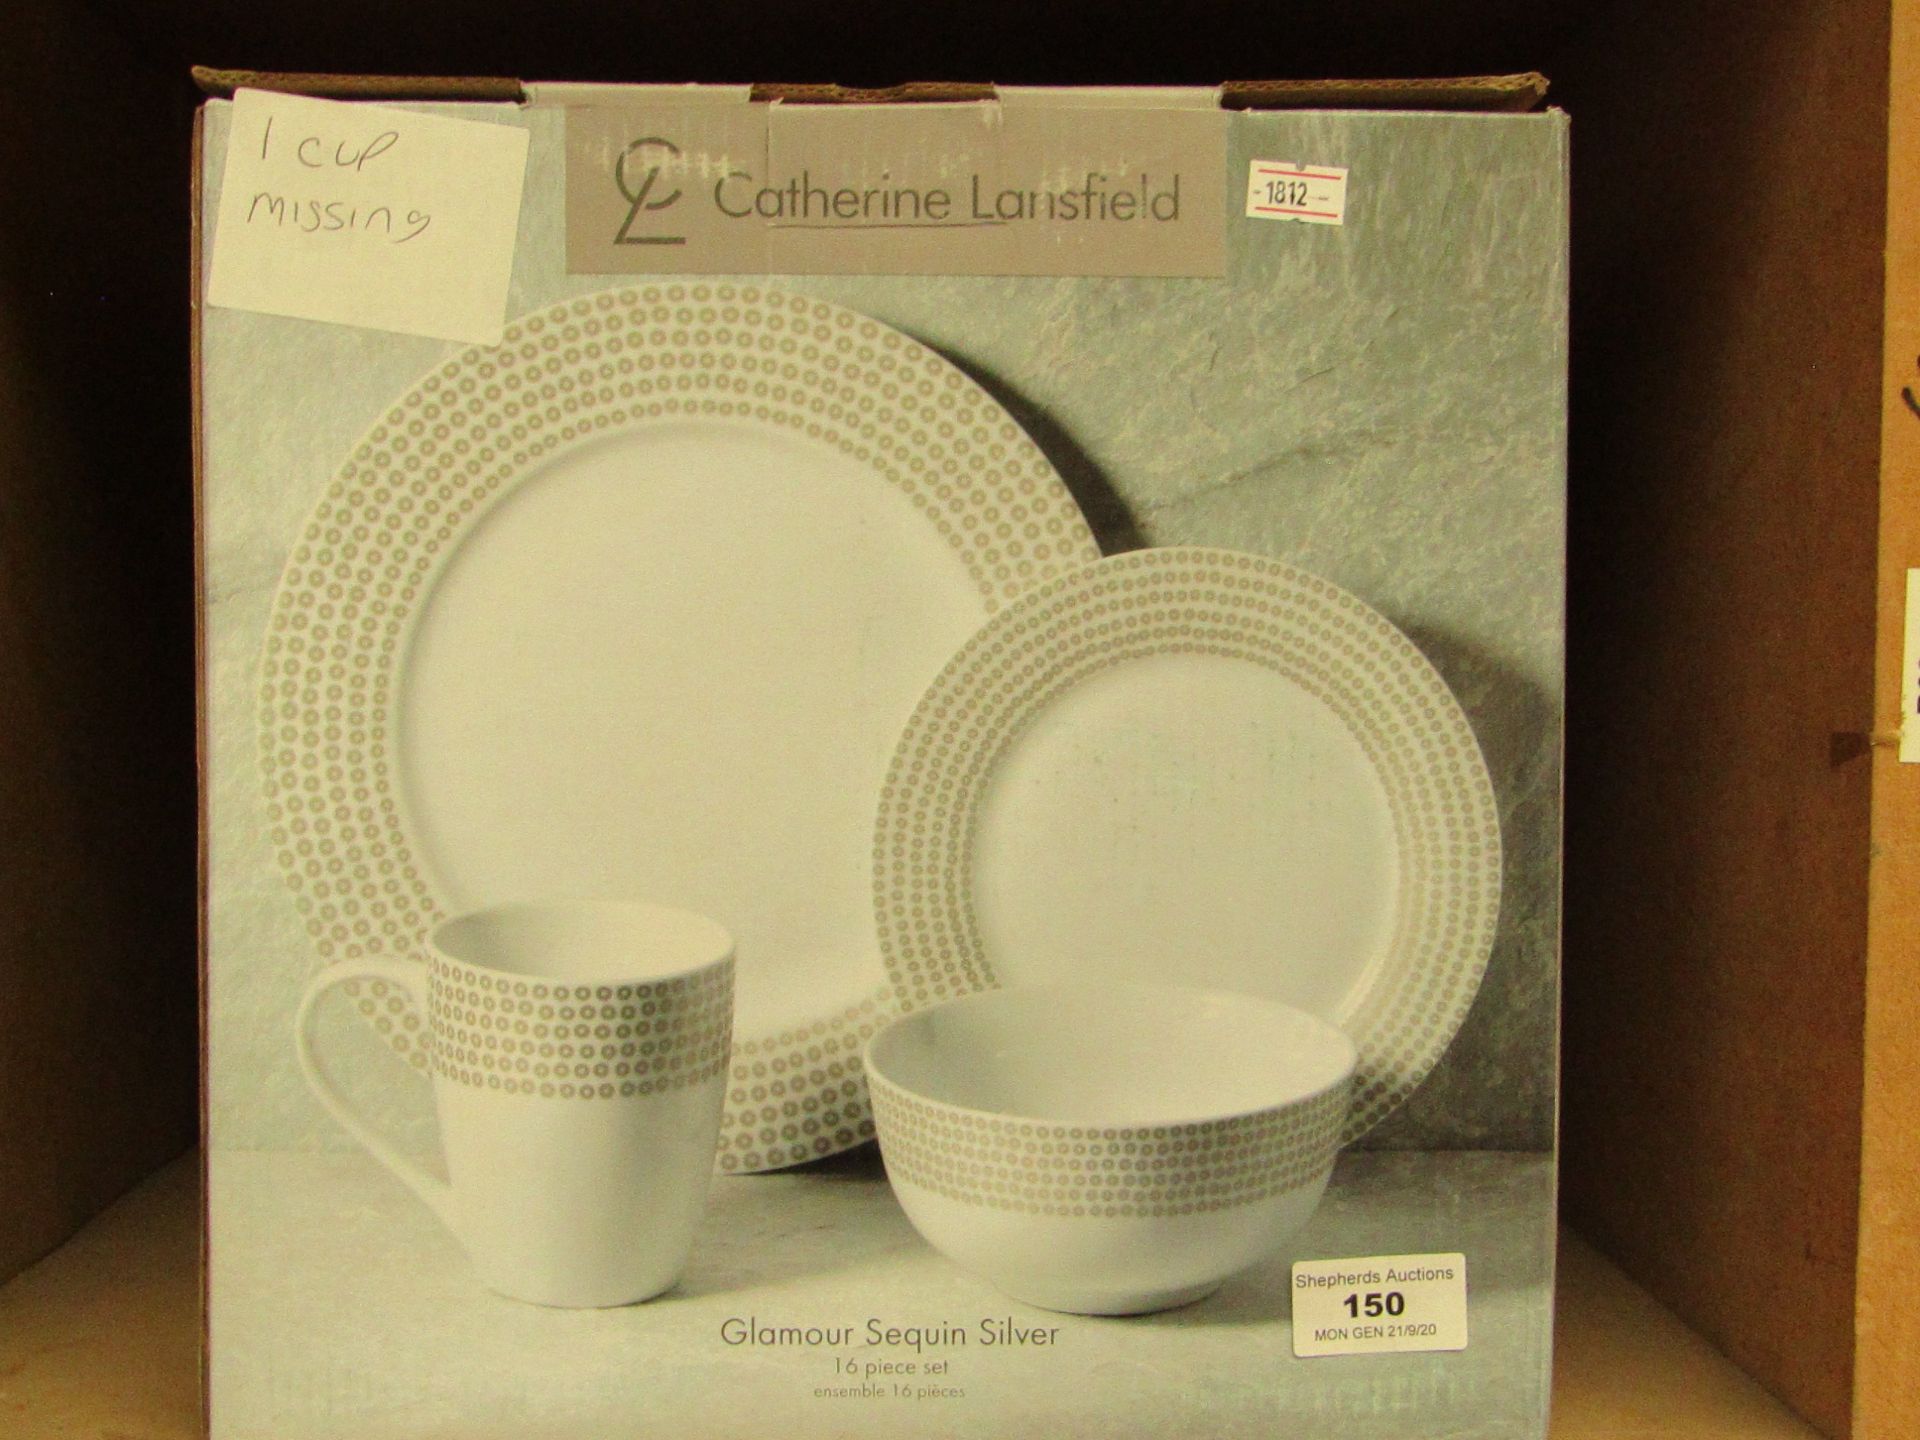 Catherine Lansfield Glamour Sequin Silver 16 Piece Set. Missing 1 Cup but everything else is there